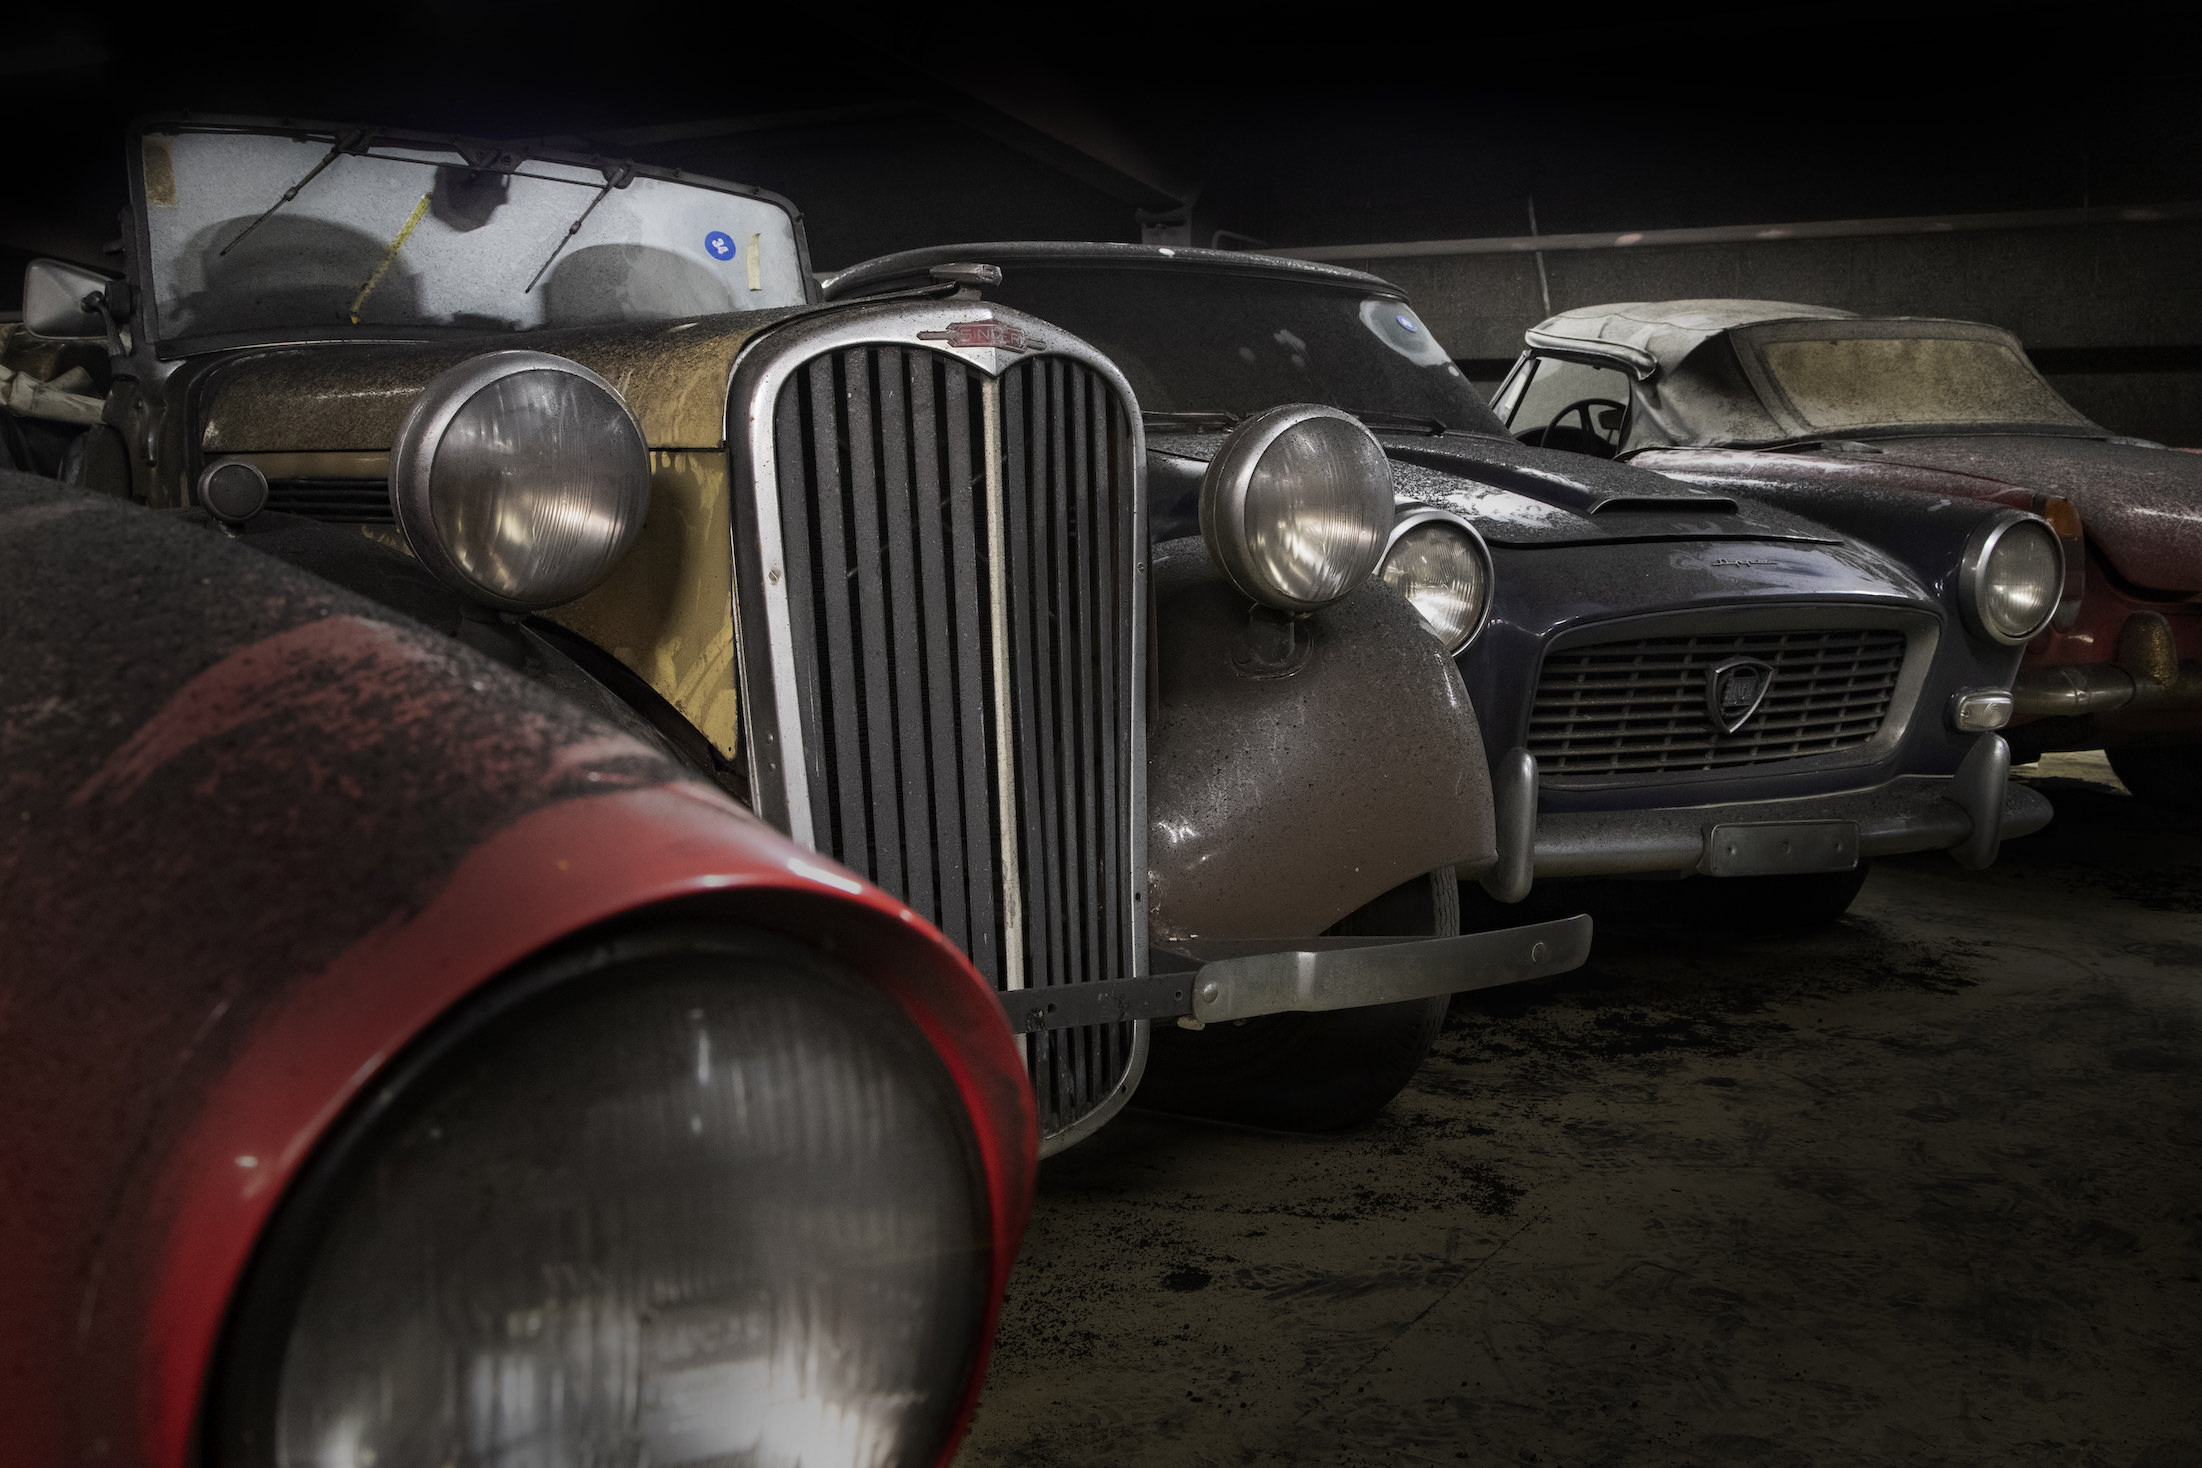 An Amazing Collection Of 230 Classic Cars Discovered In Hidden